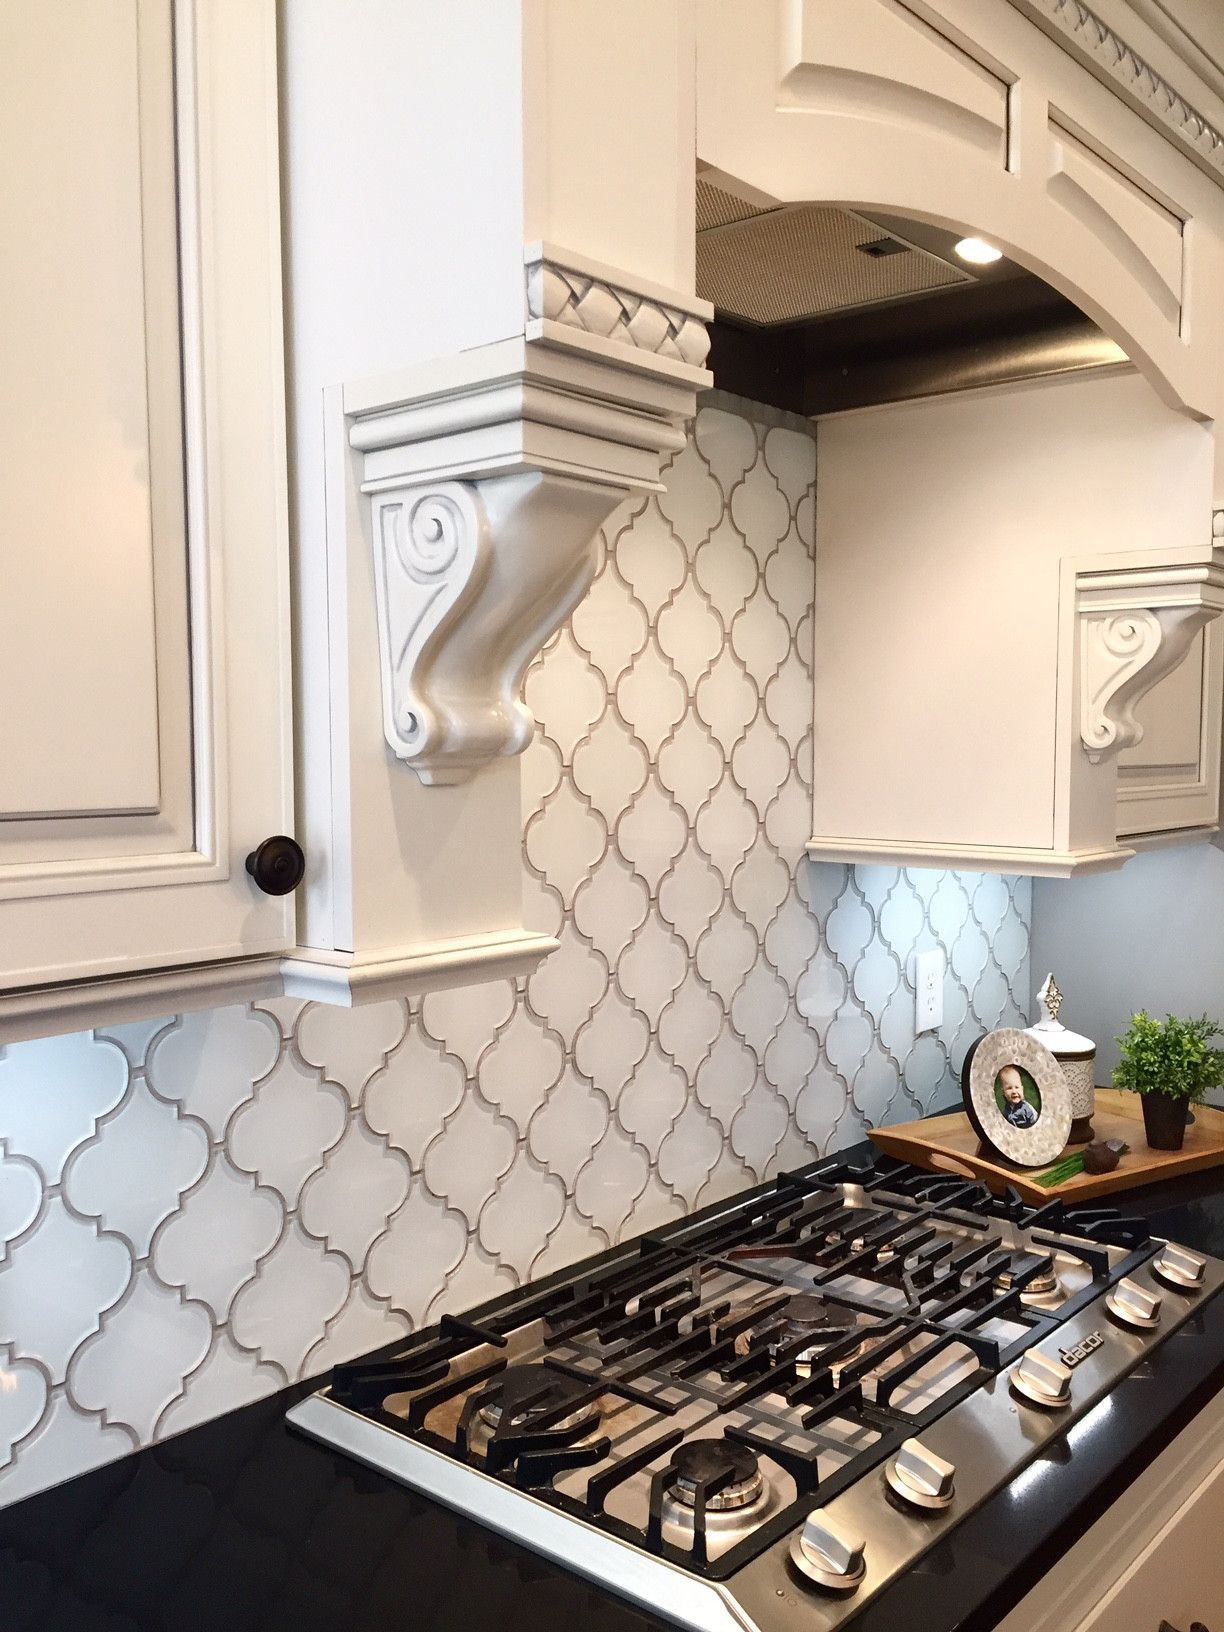 Kitchen Backsplashes Mosaic
 Bring a touch of elegance to your new new kitchen